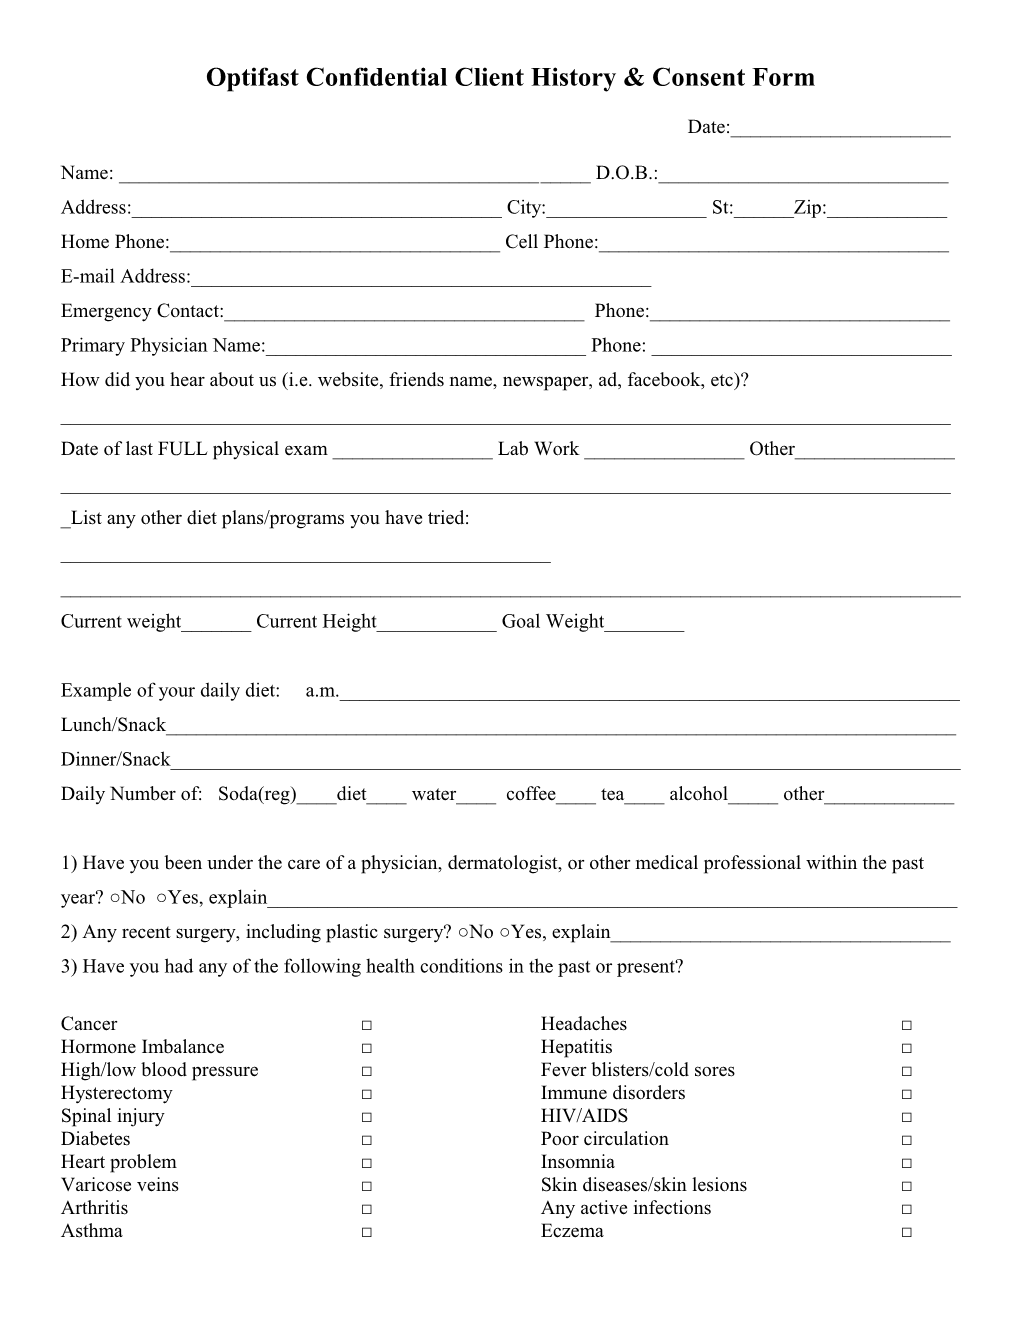 Confidential Client History & Consent Form